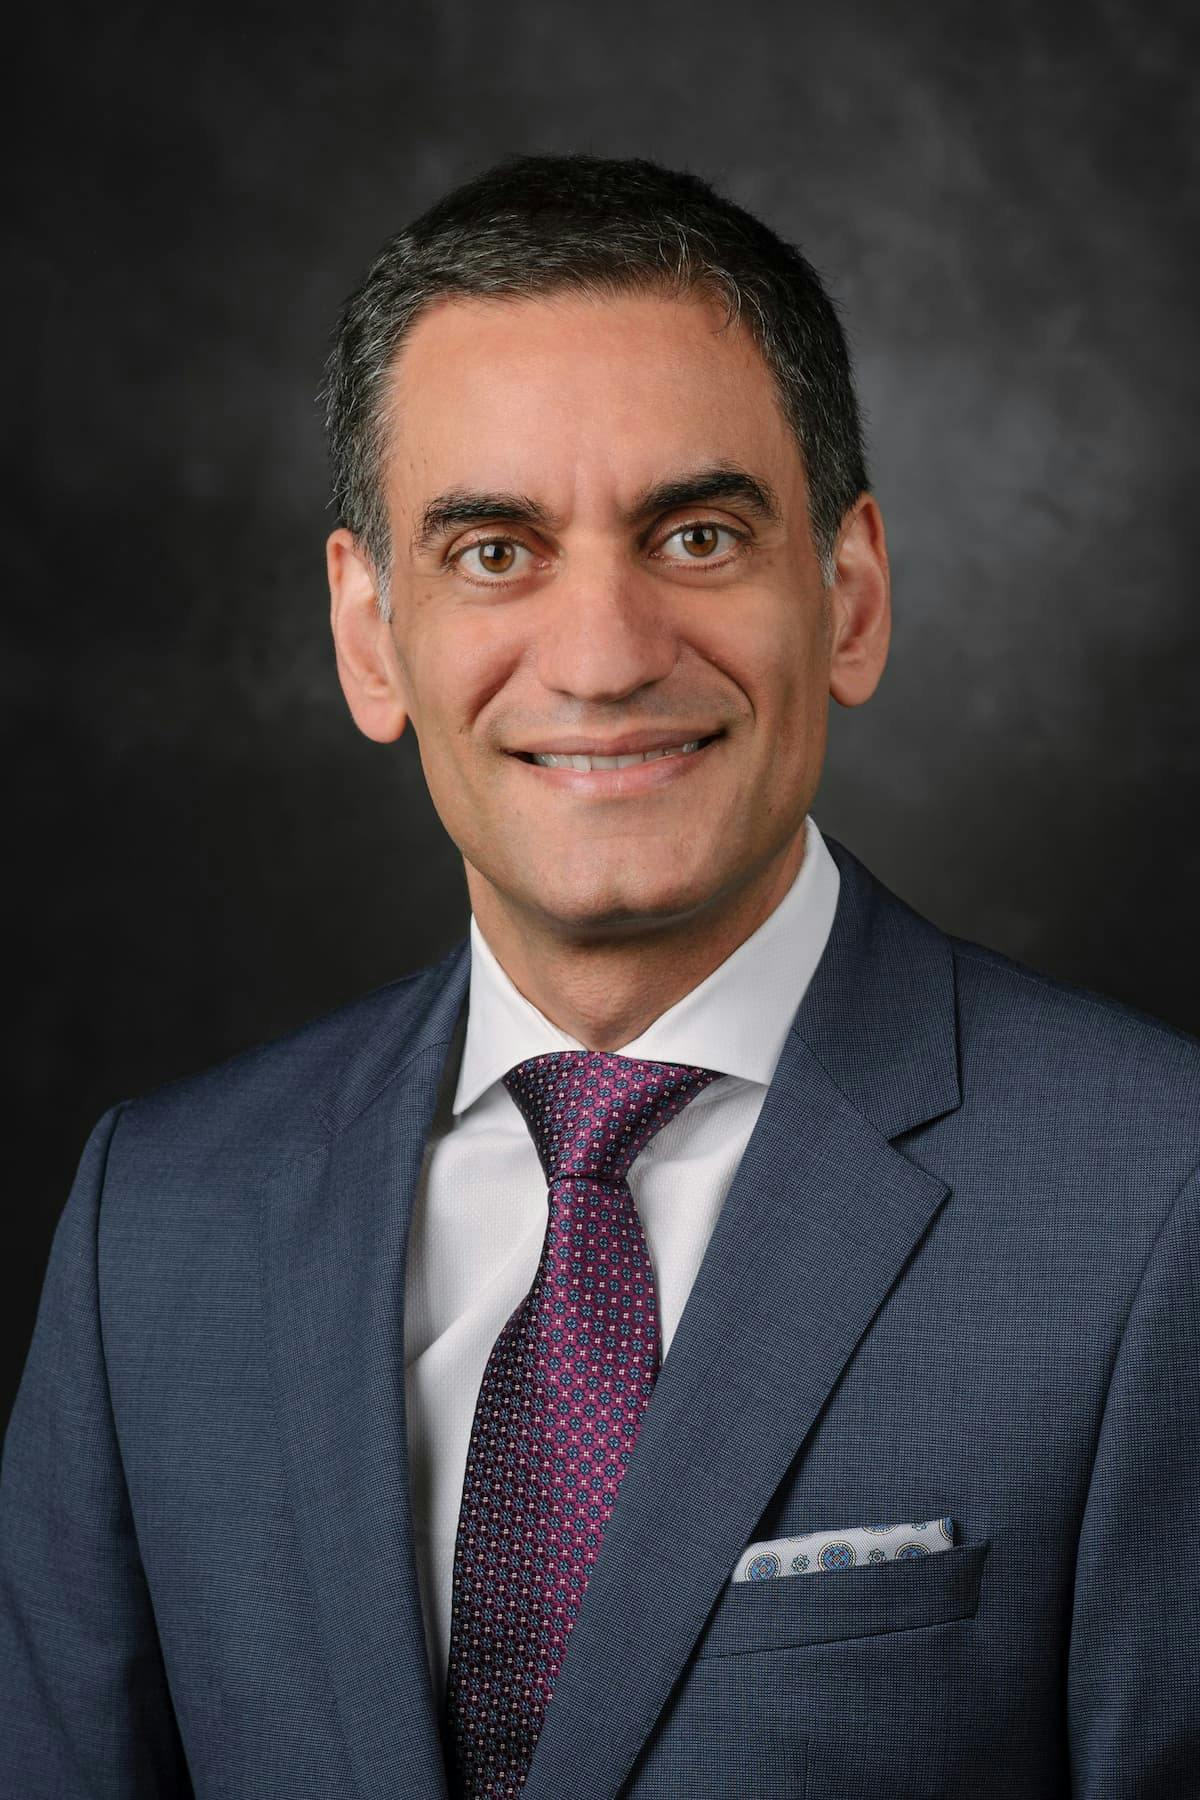 Jose Karam, MD, FACS, associate professor in the Department of Urology and Department of Translational Molecular Pathology at the University of Texas MD Anderson Cancer Center